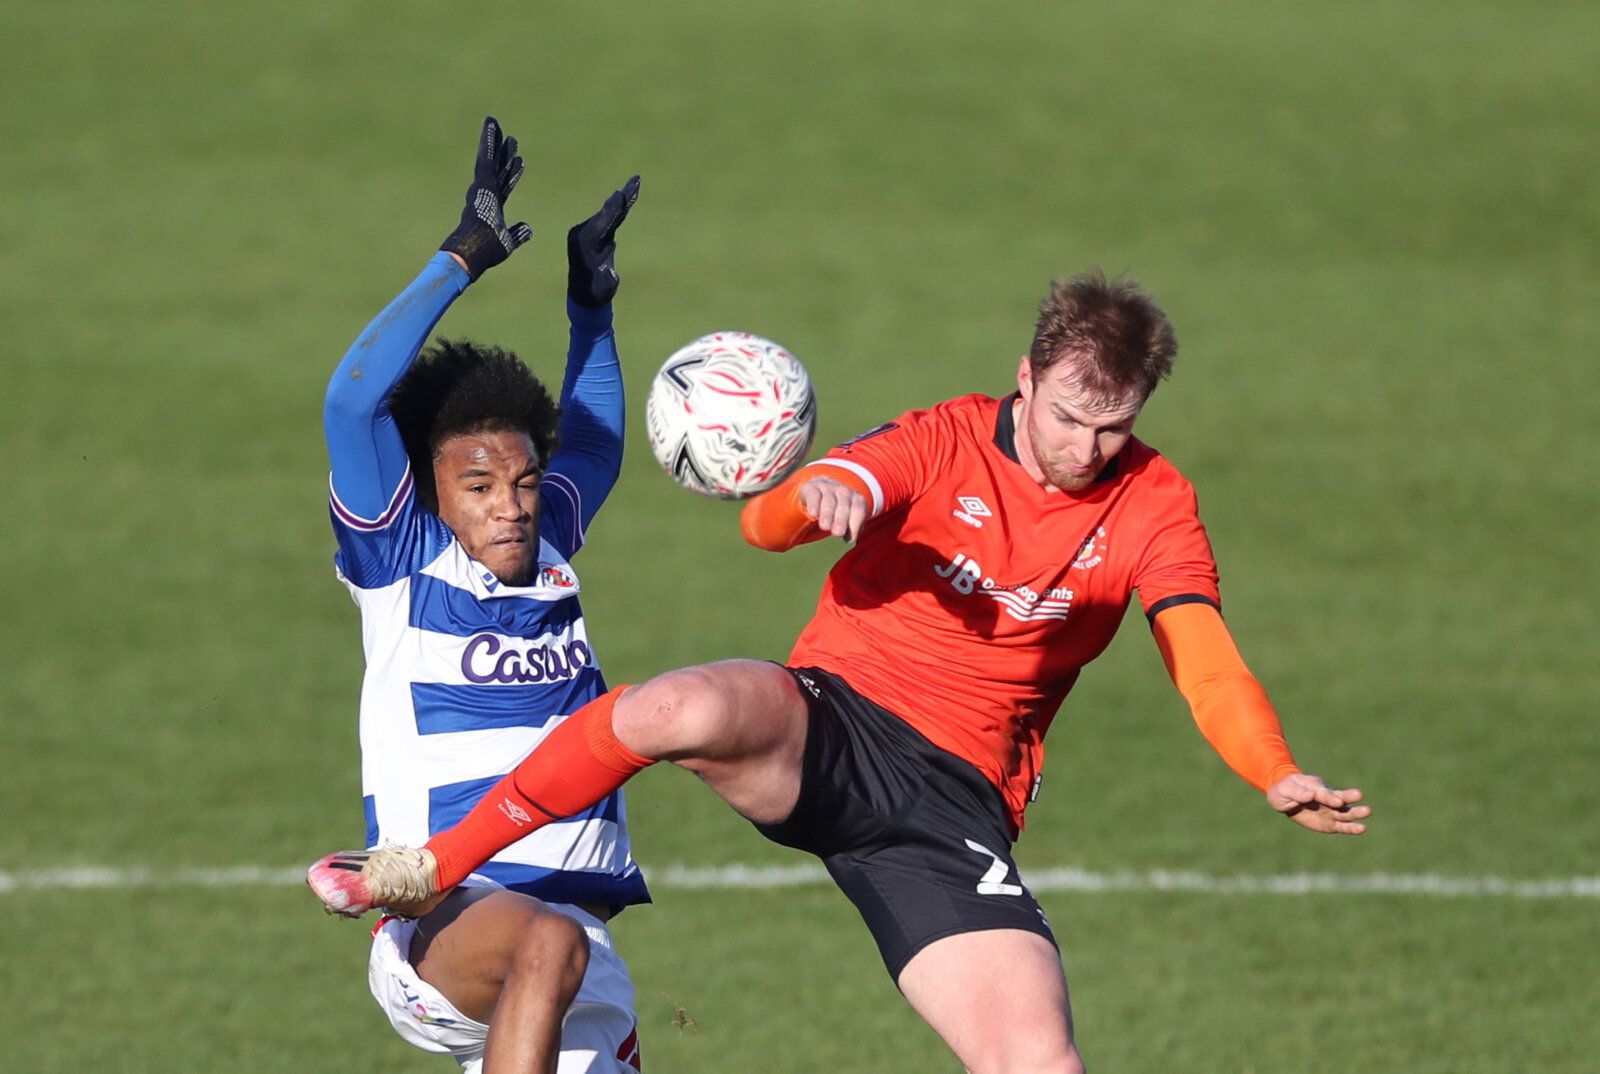 Soccer Football - FA Cup - Third Round - Luton Town v Reading - Kenilworth Road, Luton, Britain - January 9, 2021 Luton Town's James Bree in action with Reading's Jayden Onen Action Images via Reuters/Peter Cziborra